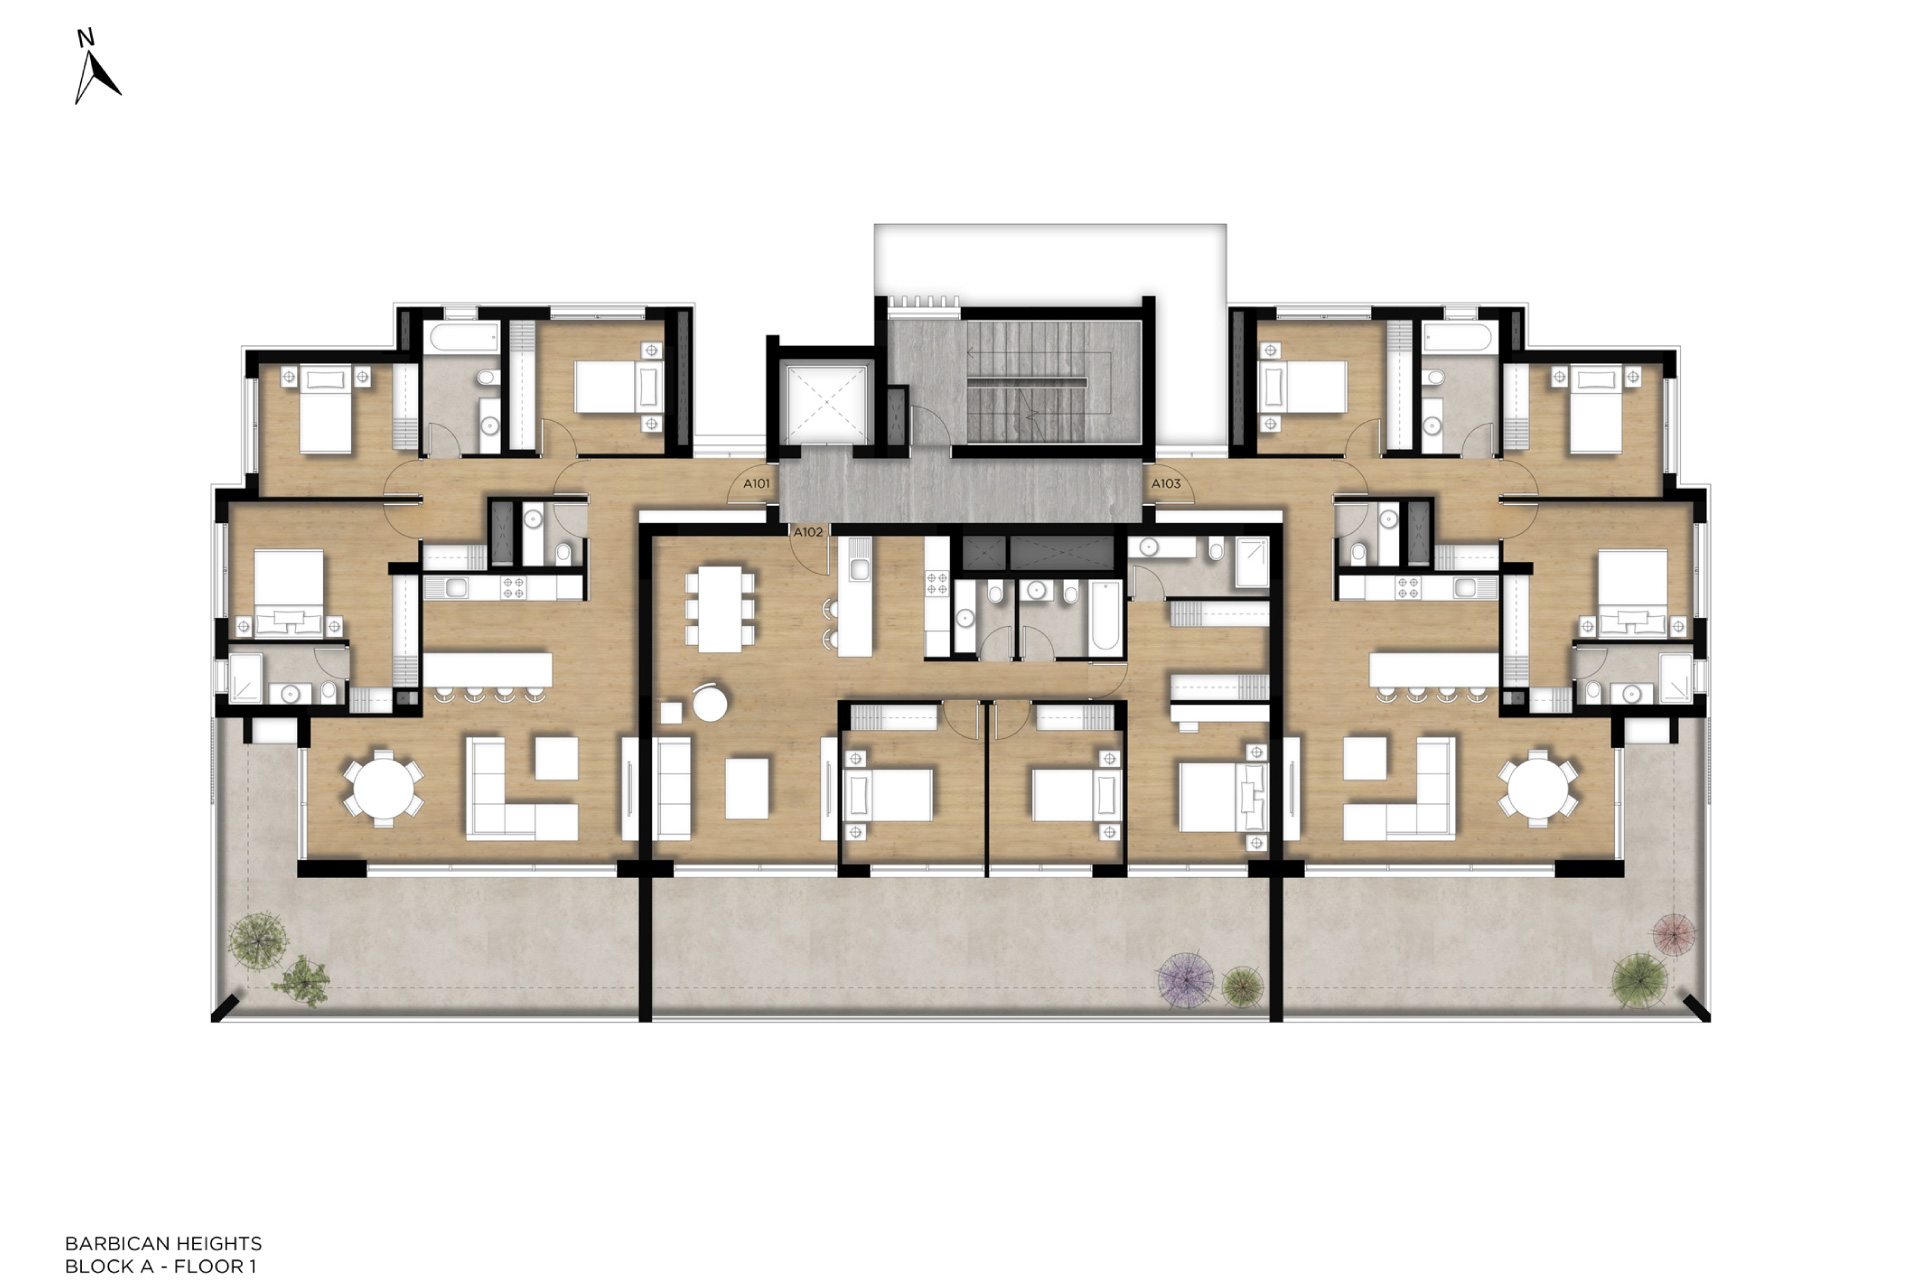 Floorplans Barbican Heights By Imperio